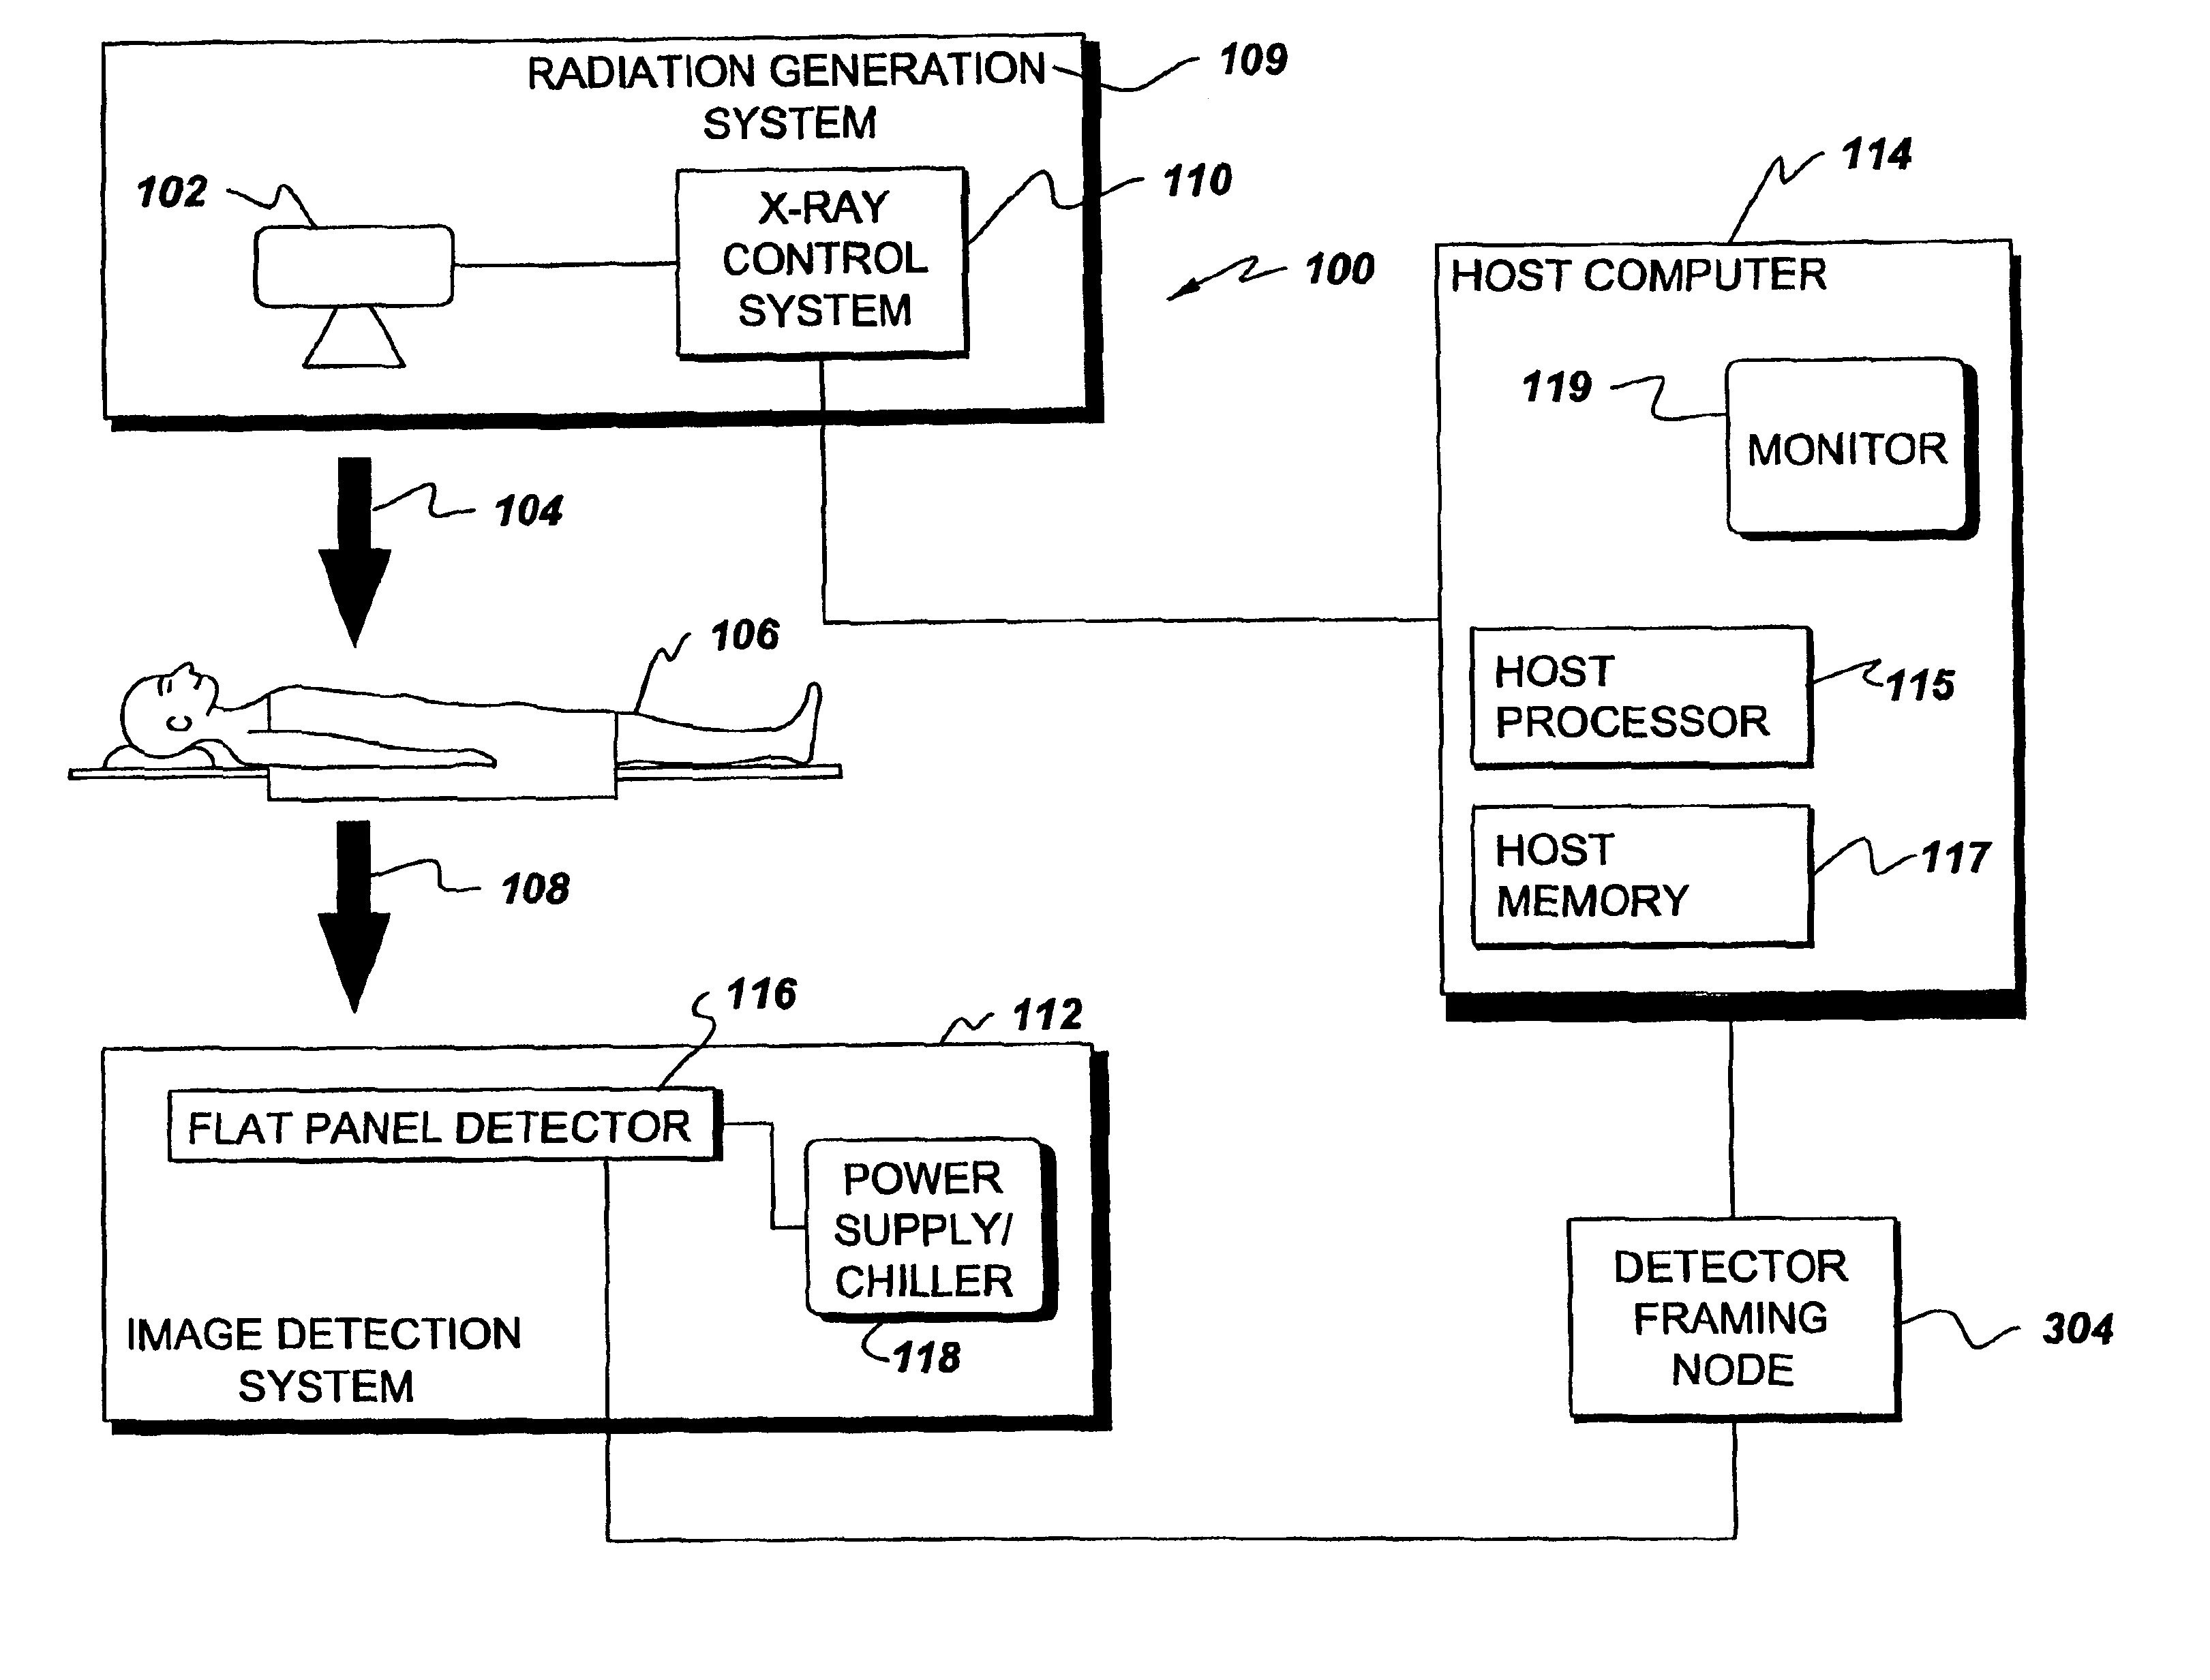 Communication of image data from image detector to host computer